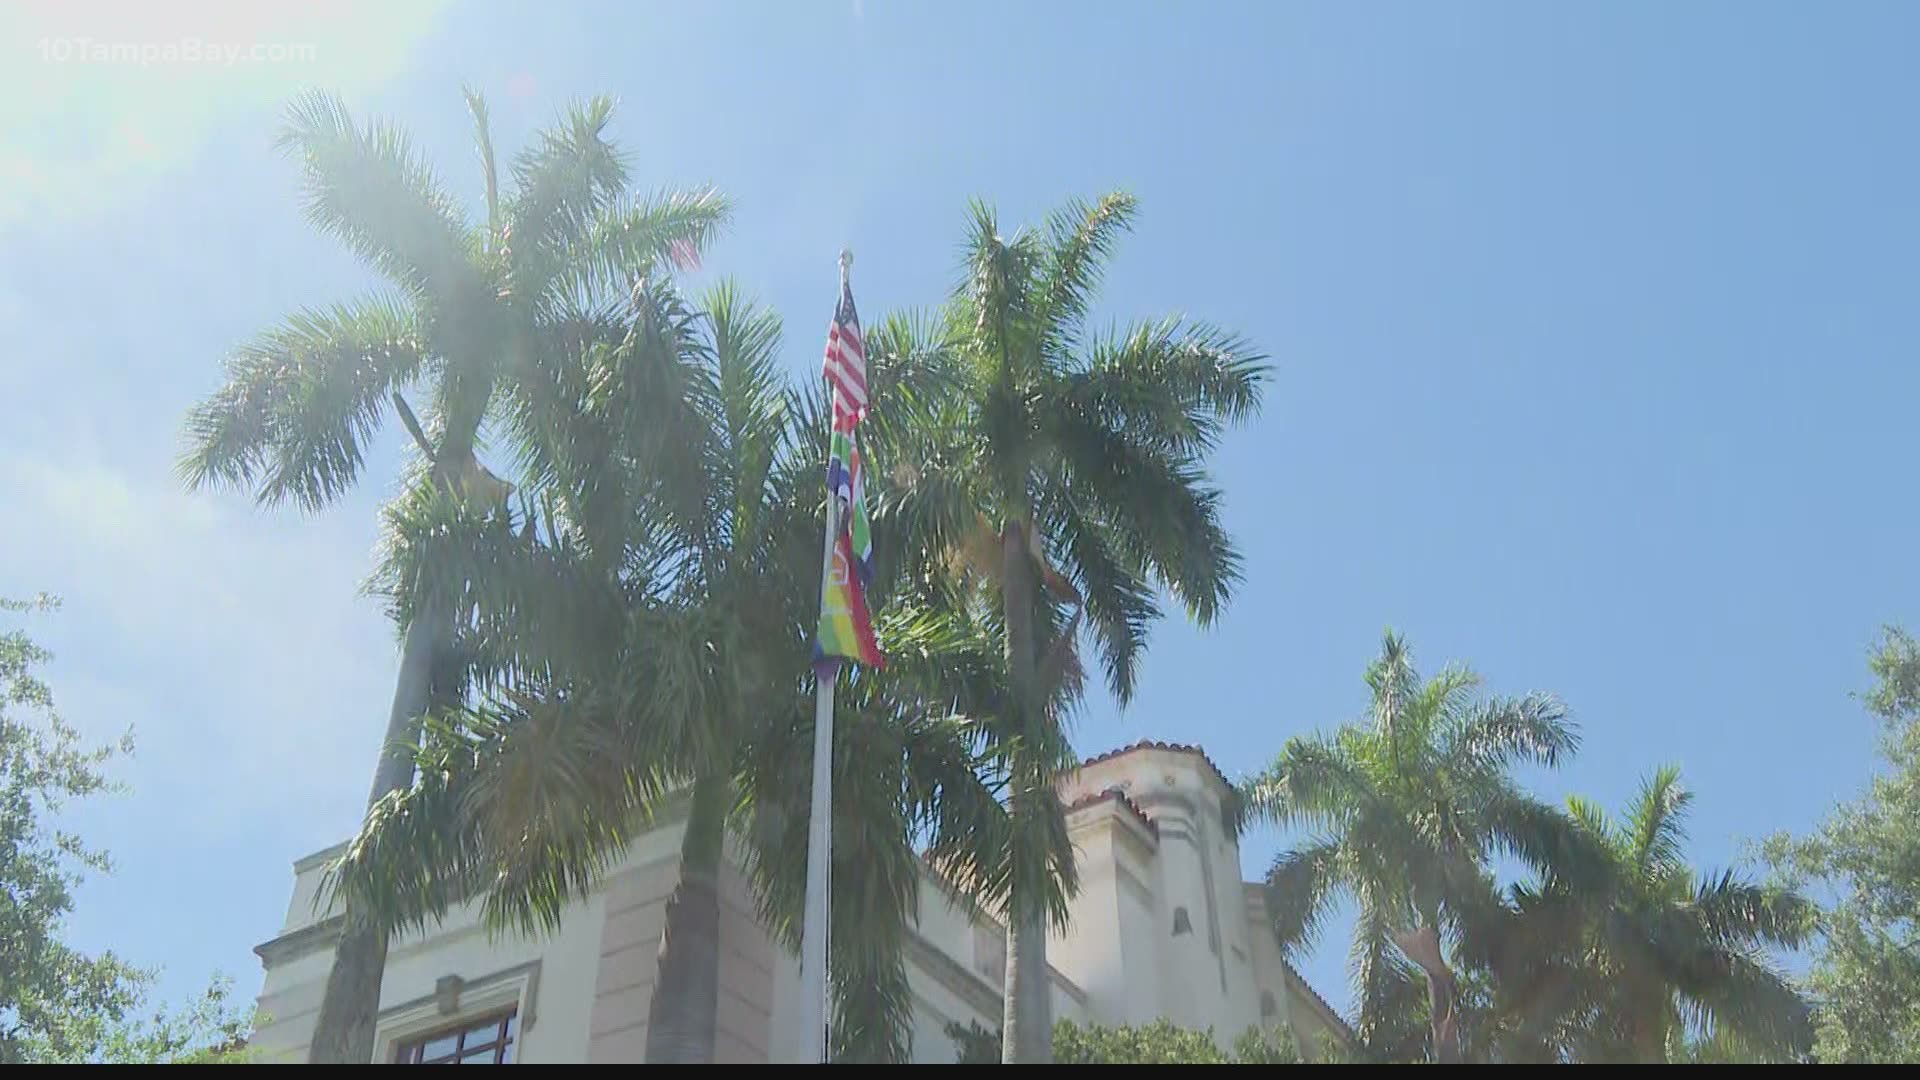 The mayor began by condemning Gov. Ron DeSantis' signing of the state's controversial transgender athlete ban.